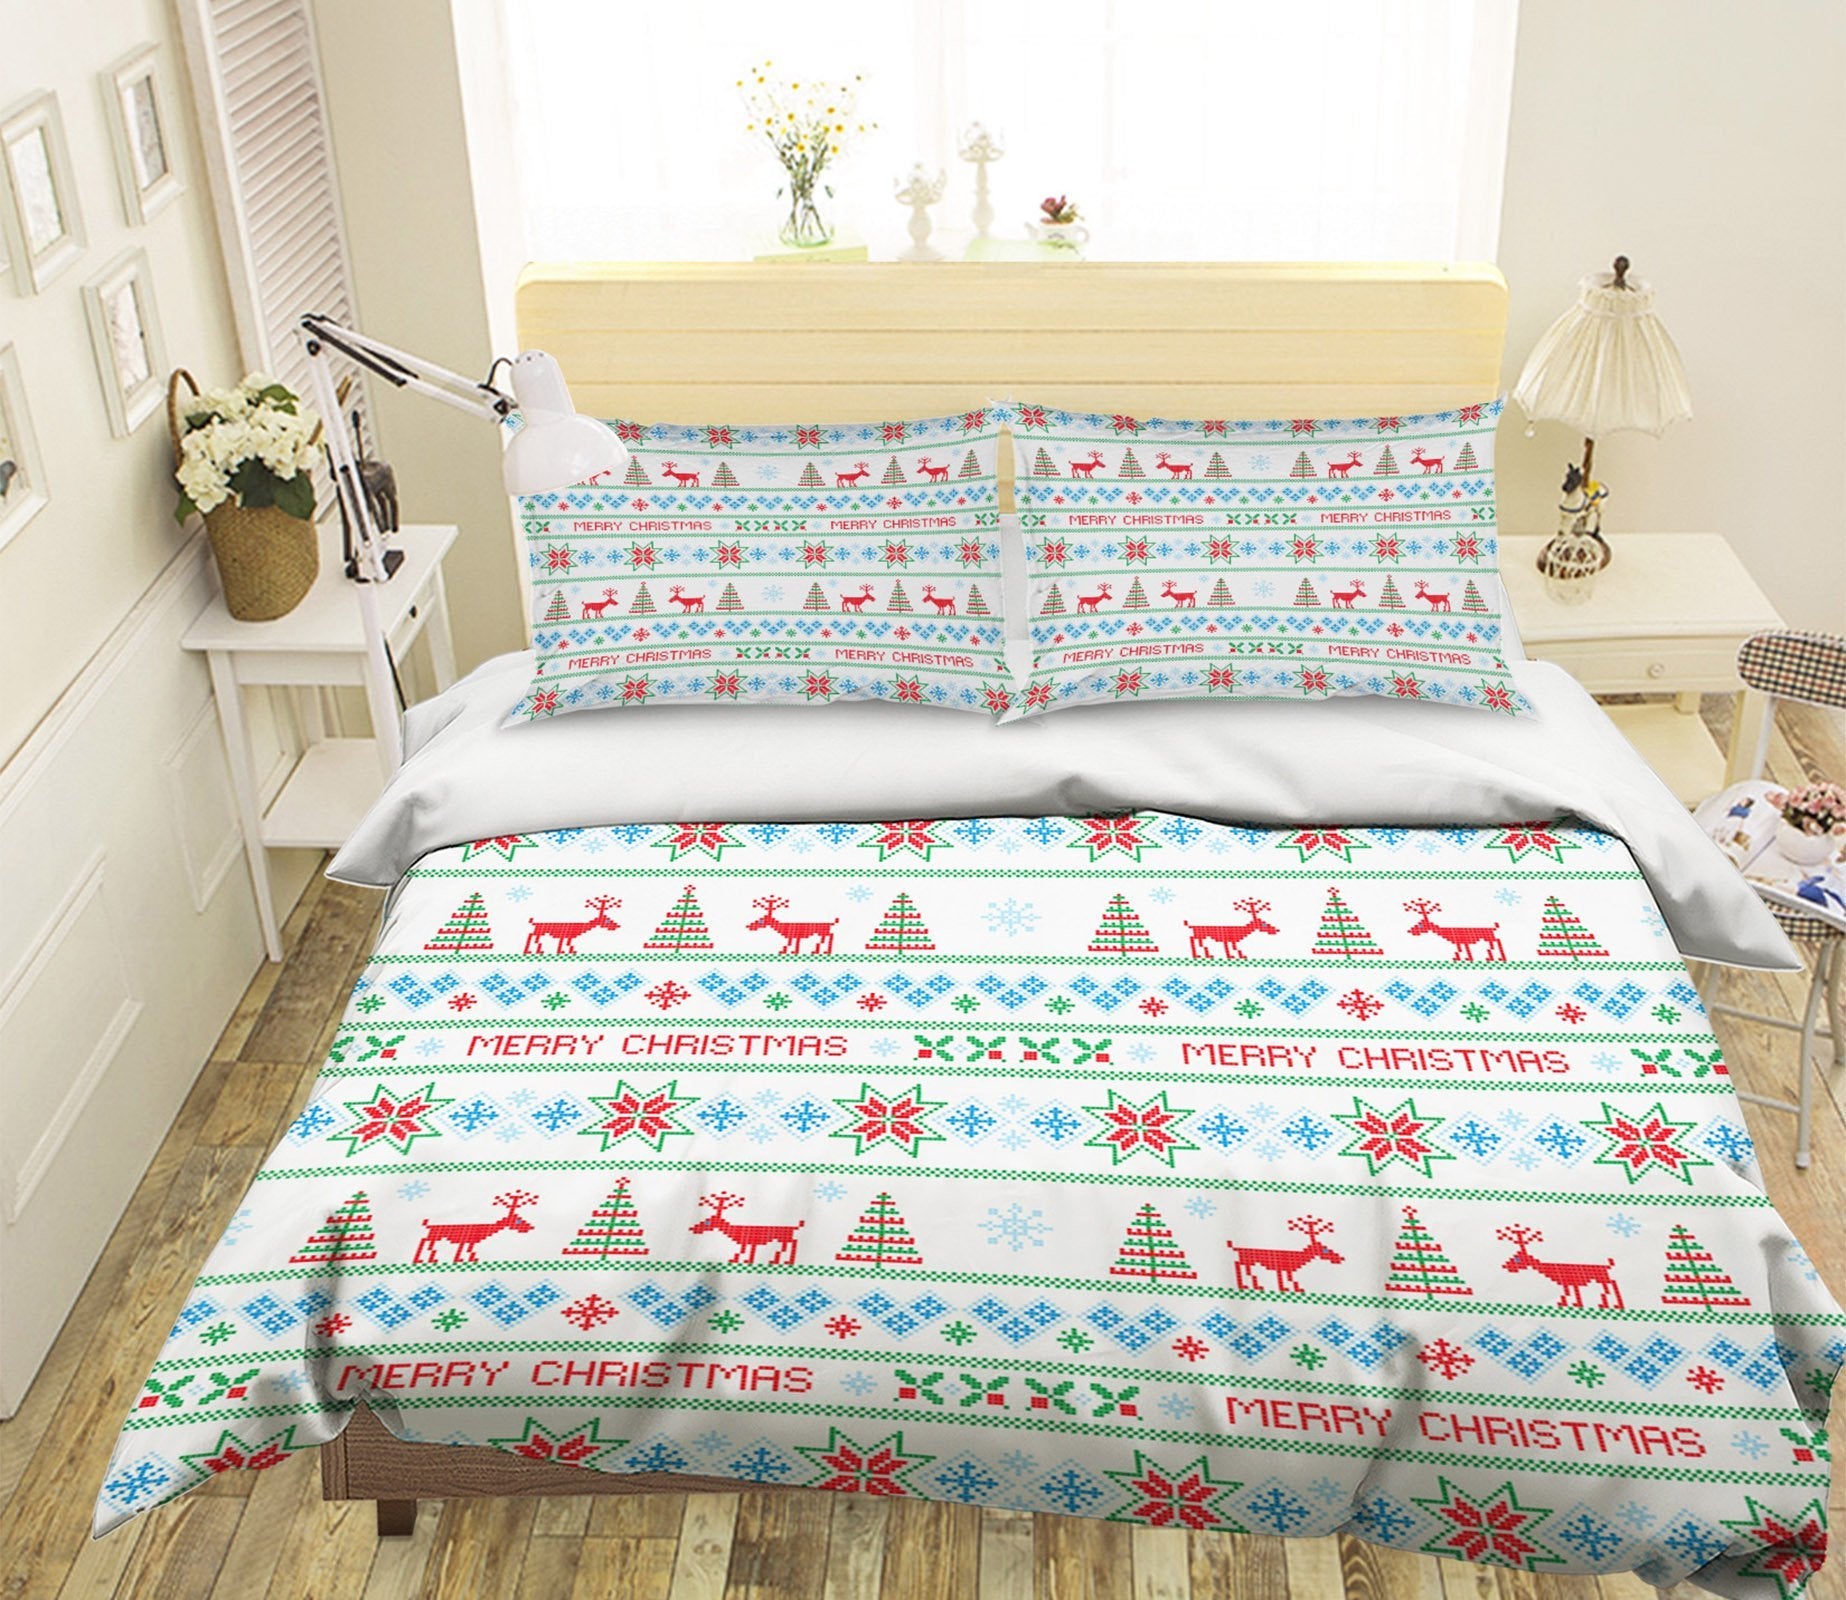 3D Christmas Deer Pattern 1 Bed Pillowcases Quilt Quiet Covers AJ Creativity Home 